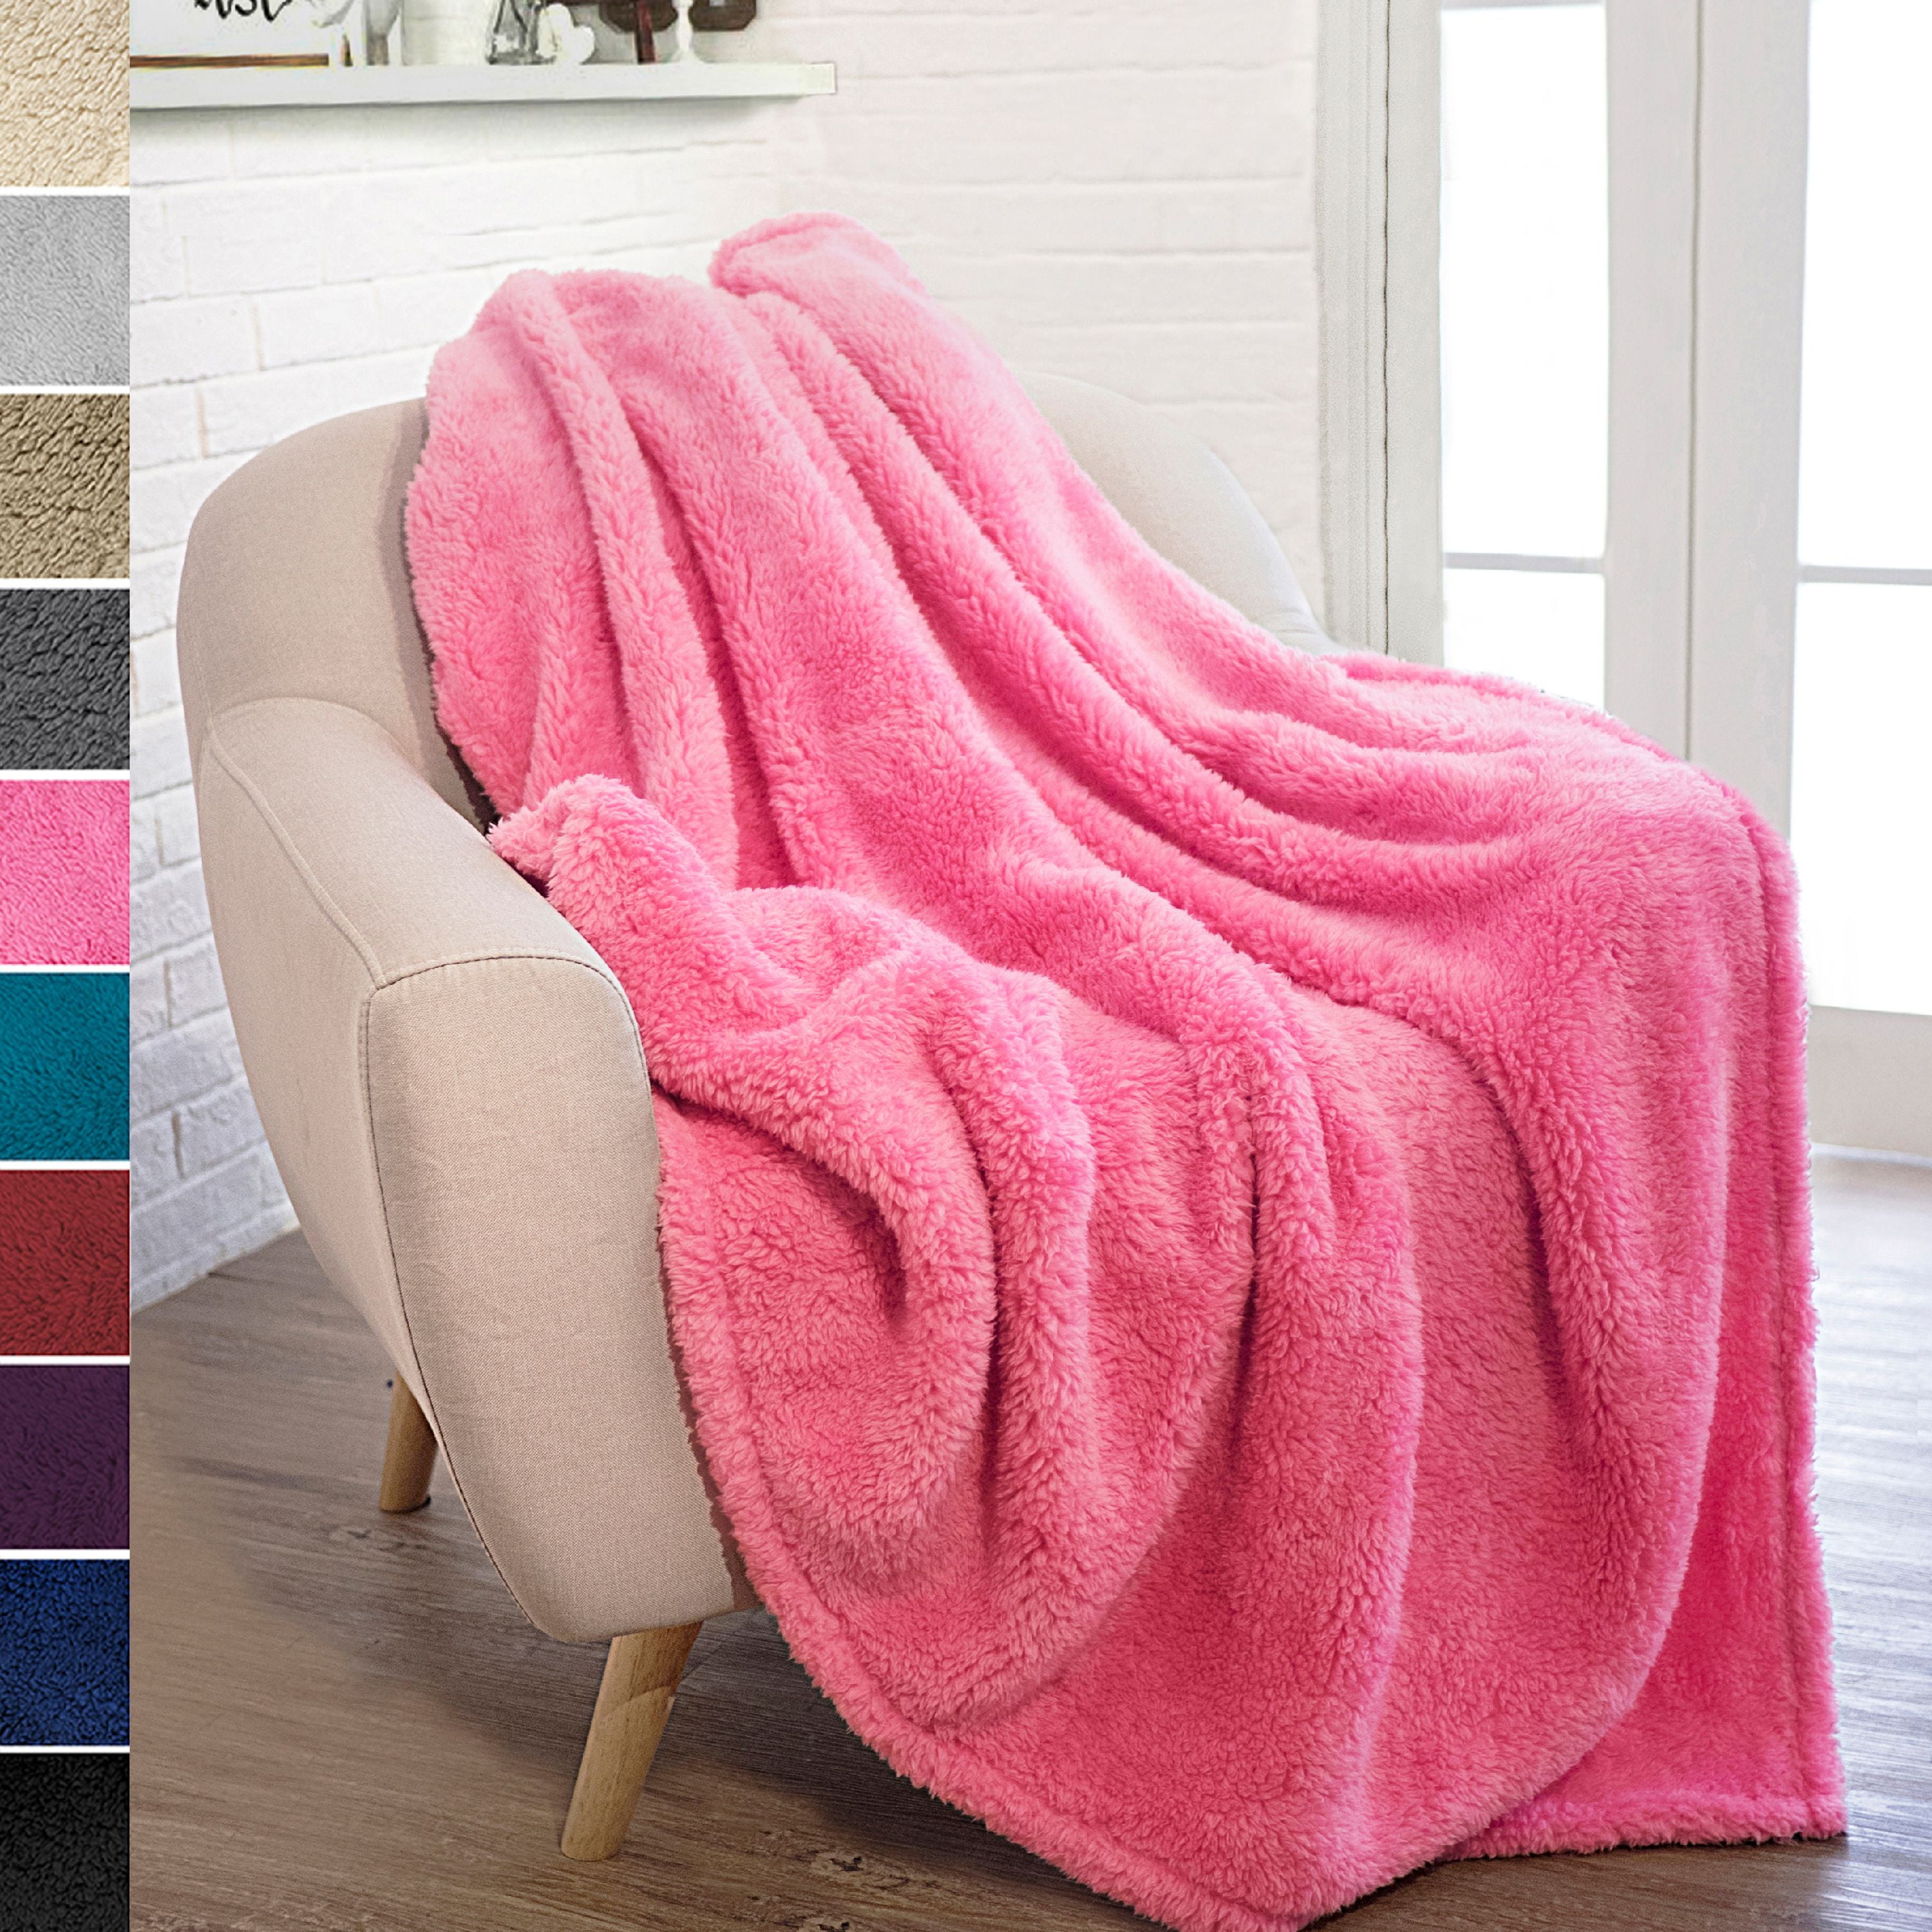 EXQ Home Sherpa Fleece Blanket Travel Fuzzy Plush Red Throw Blanket for Couch or Sofa Super Soft Warm Blankets for Winter